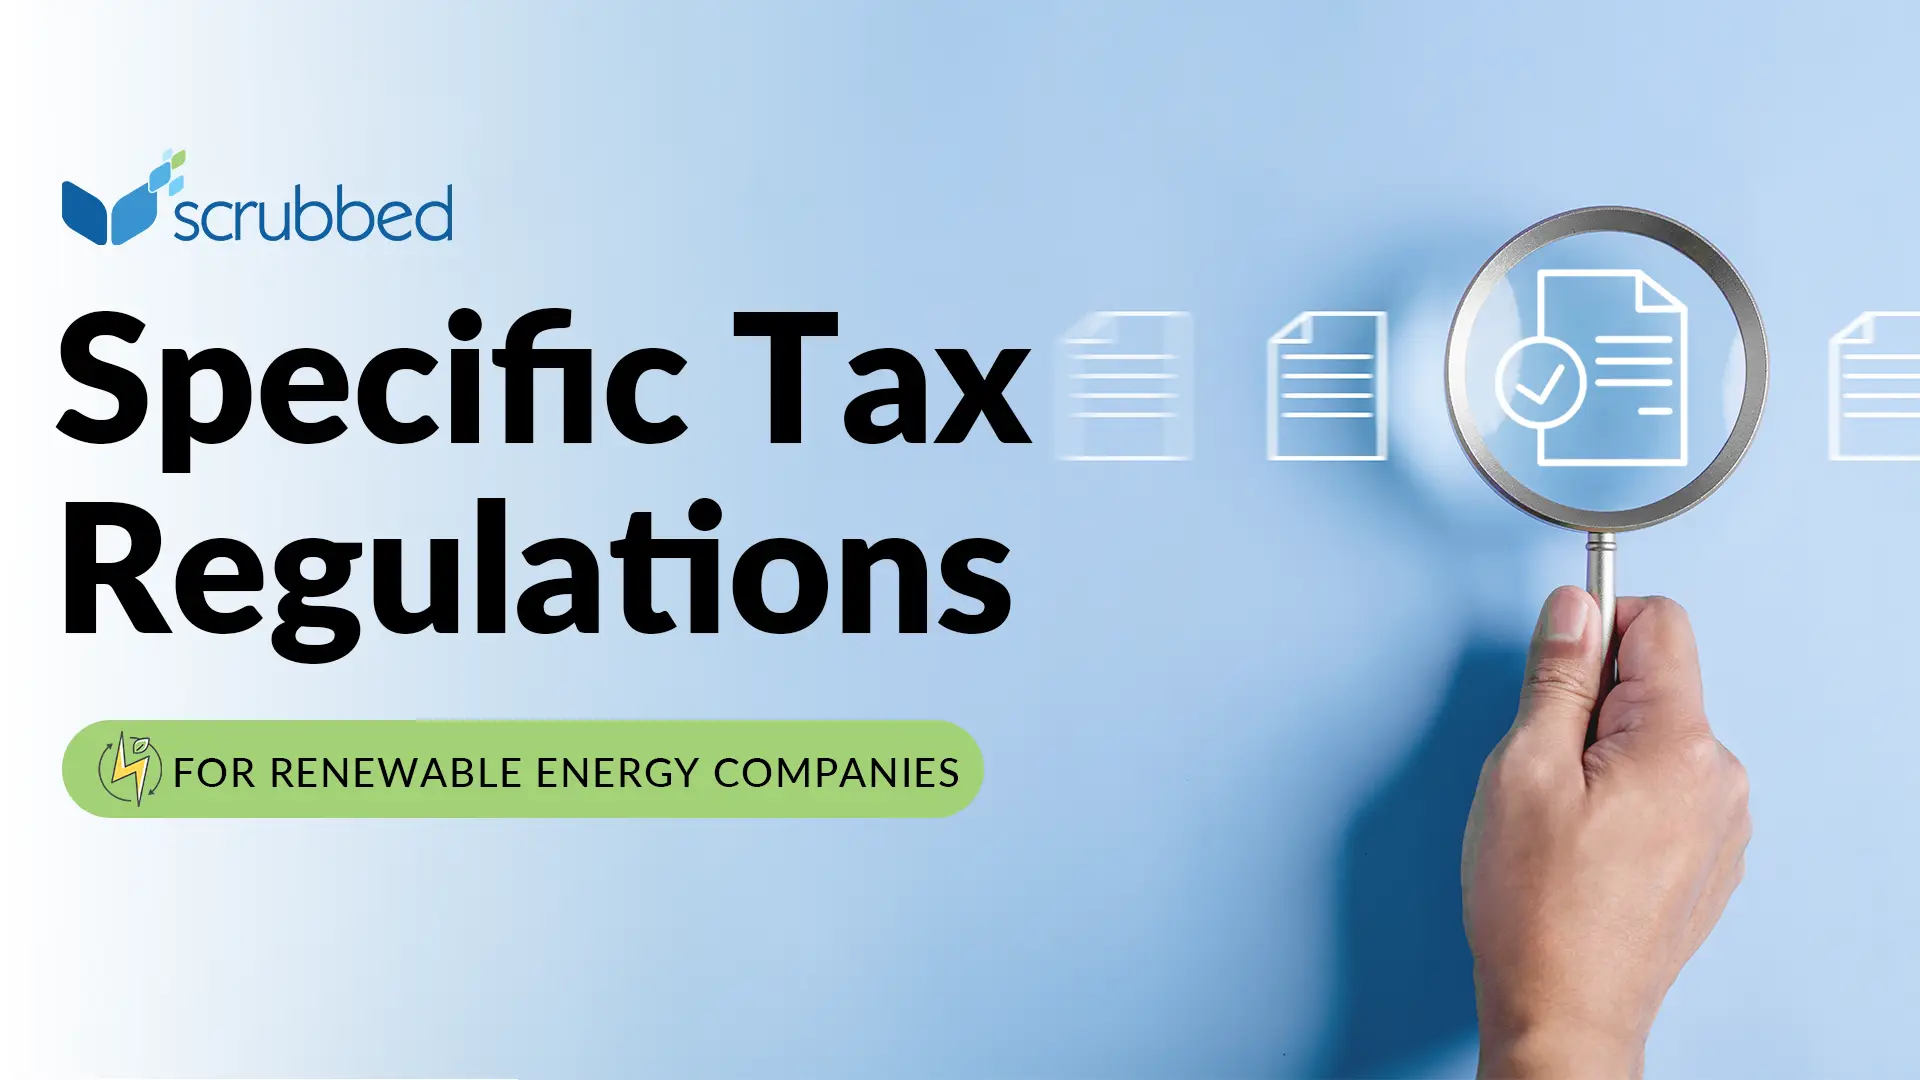 Are there specific tax regulations that apply to renewable energy companies?